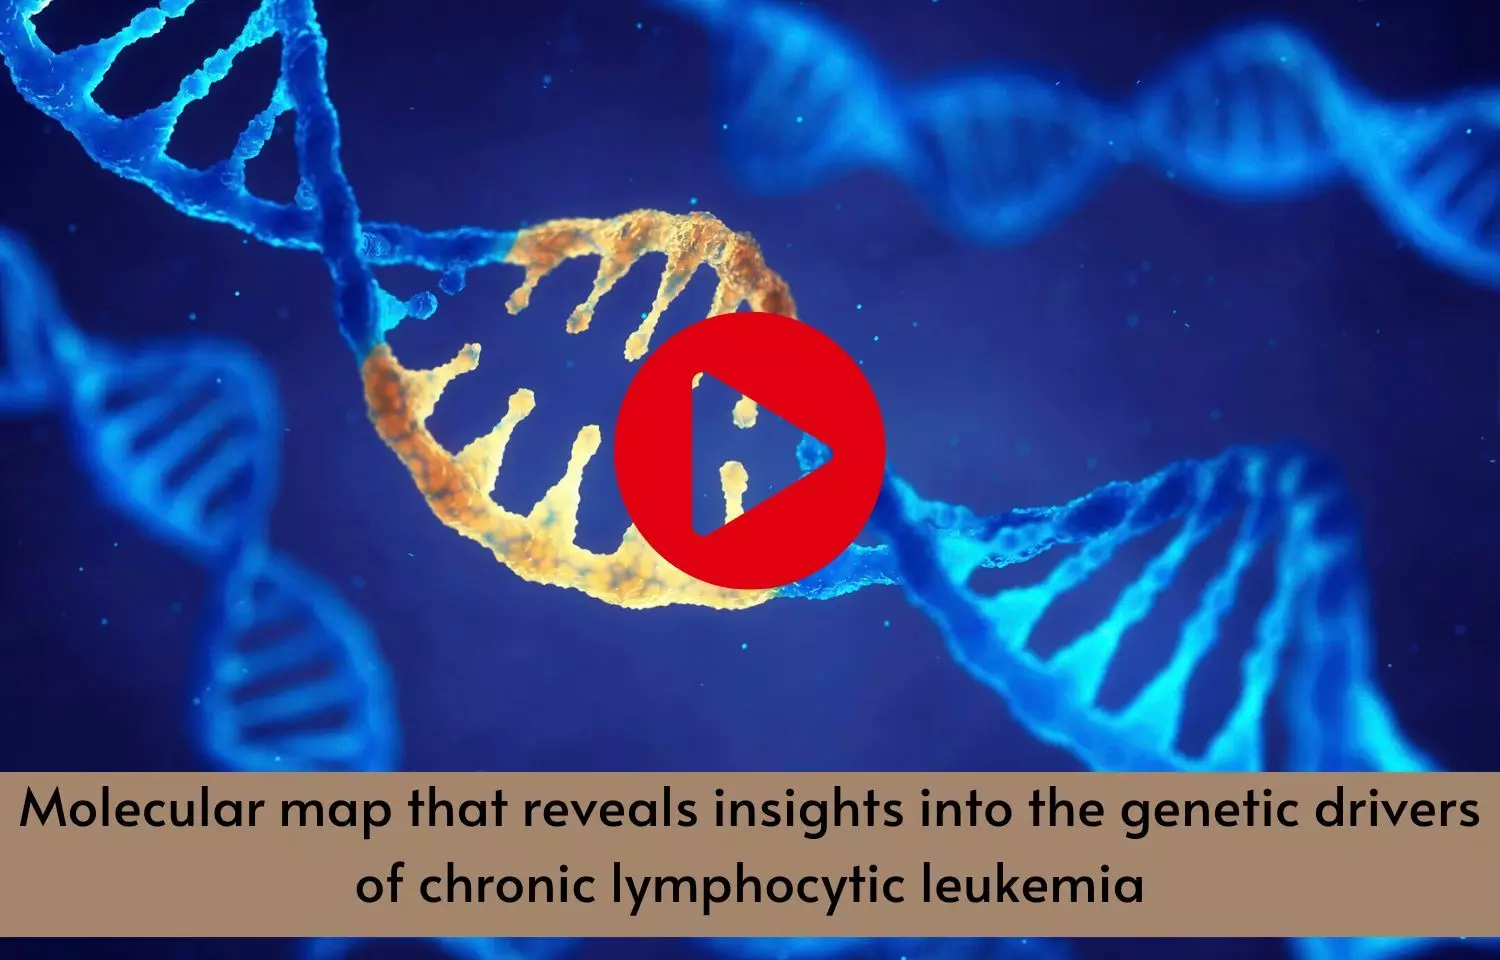 Molecular map that reveals insights into the genetic drivers of chronic lymphocytic leukemia